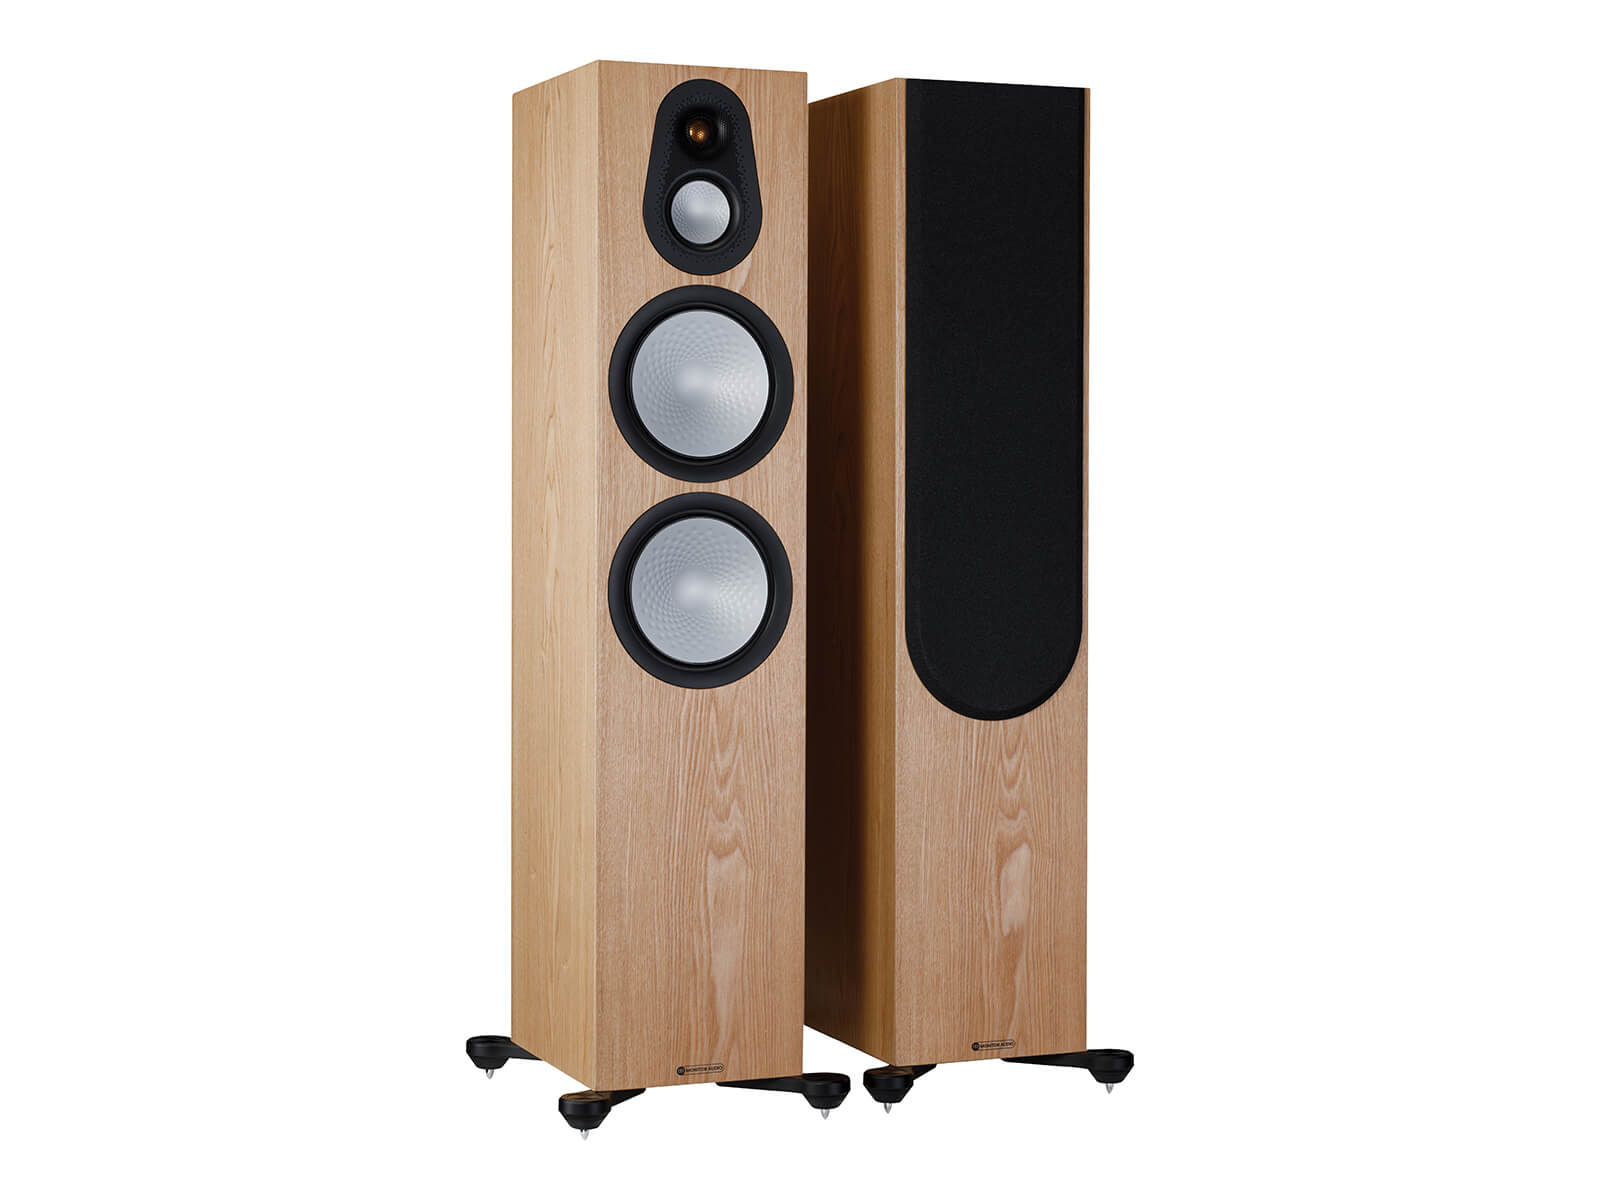 A pair of Monitor Audio's Silver 500 7G, in an ash finish, iso view, with and without grilles.